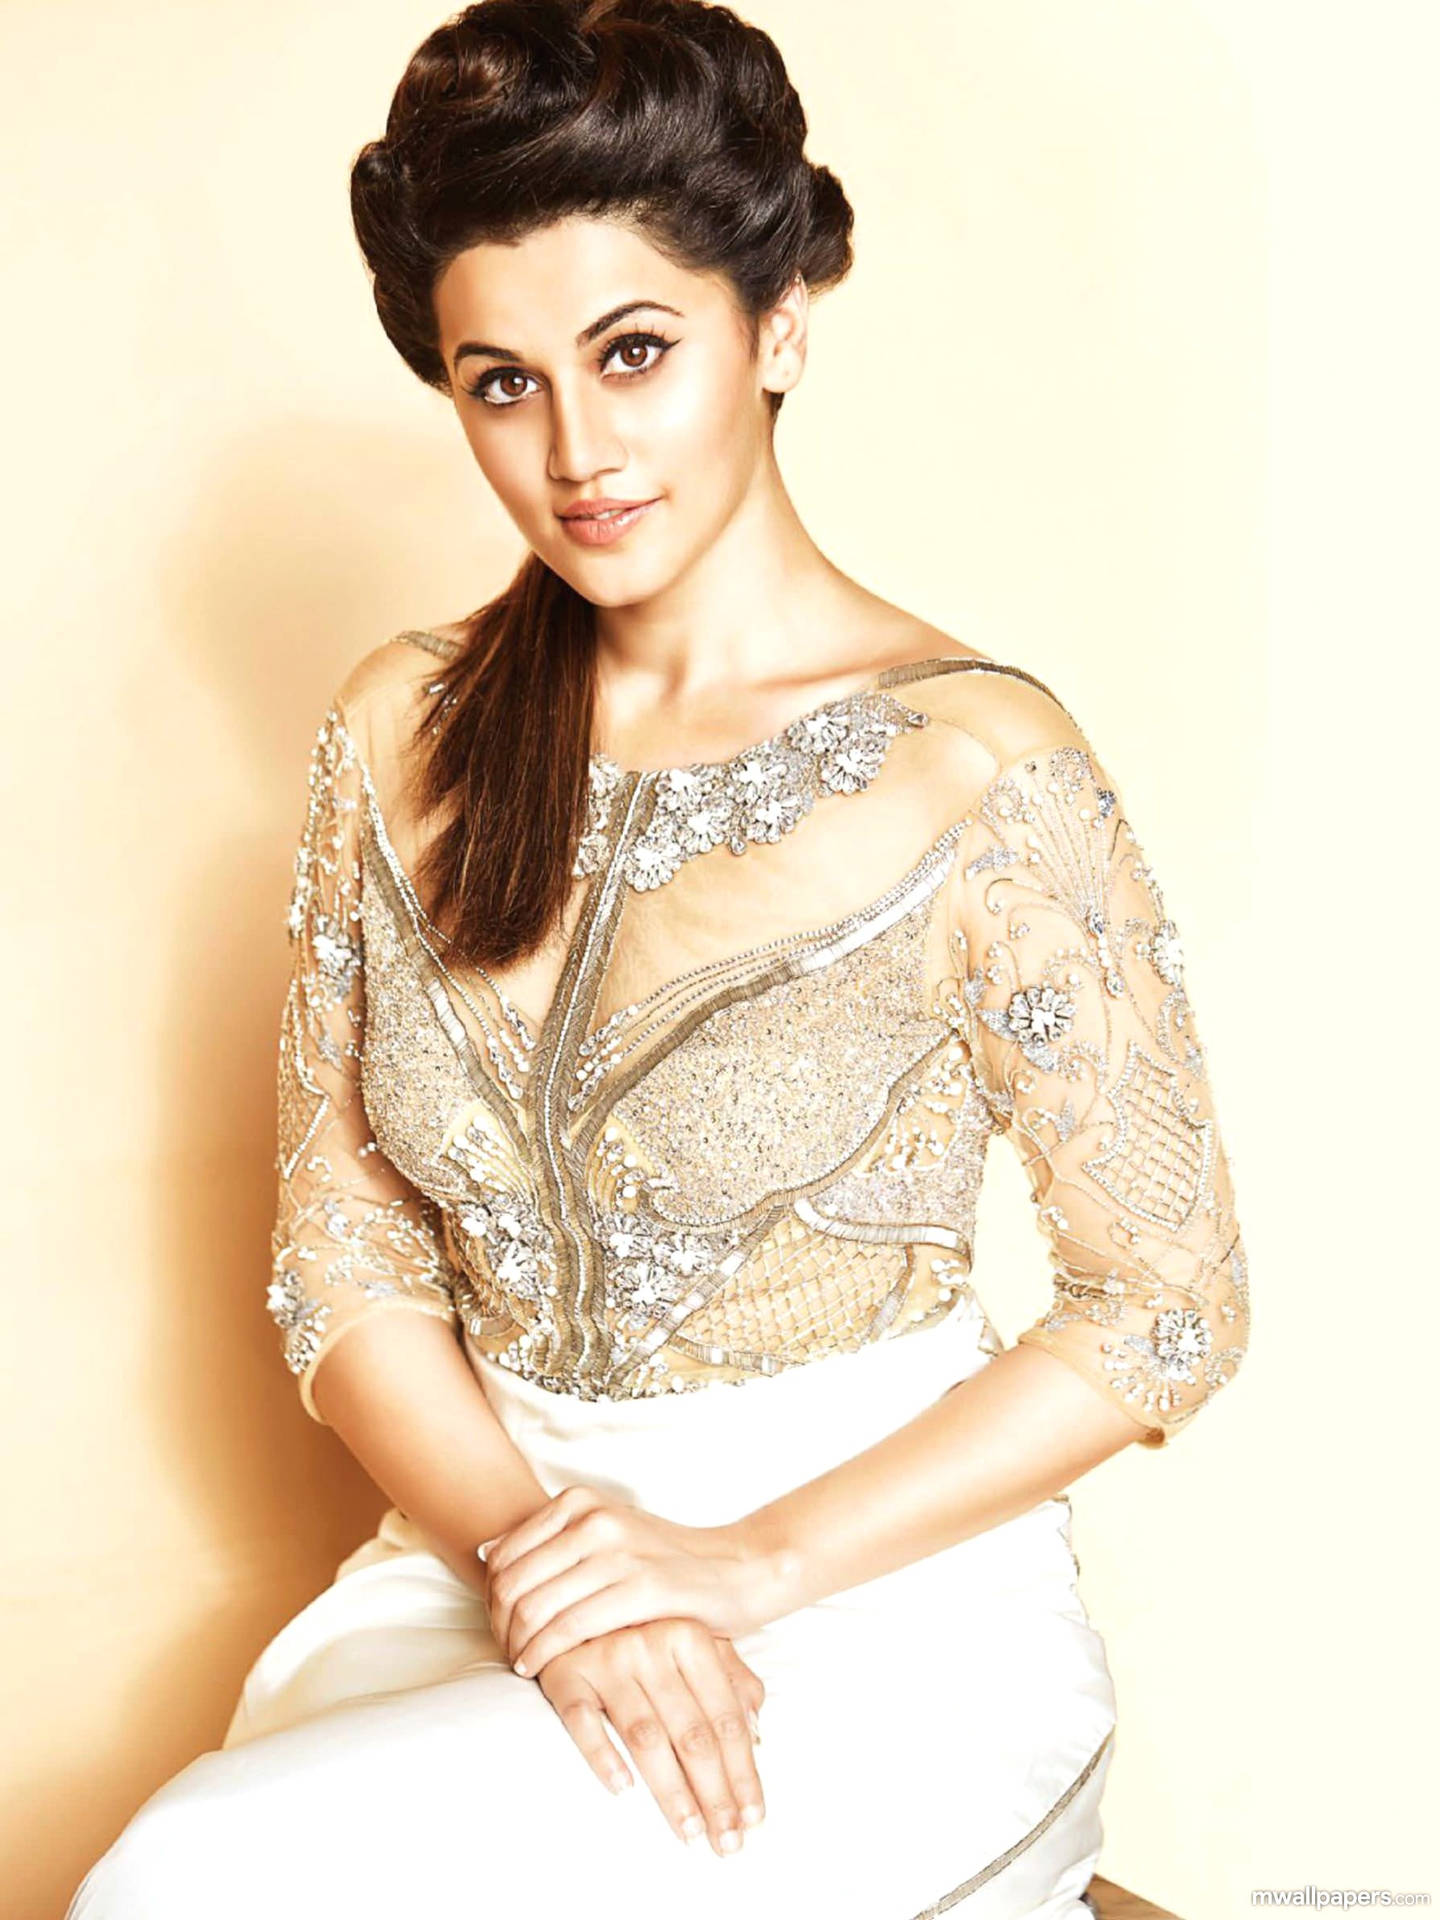 Taapsee Pannu In Formal Dress Background